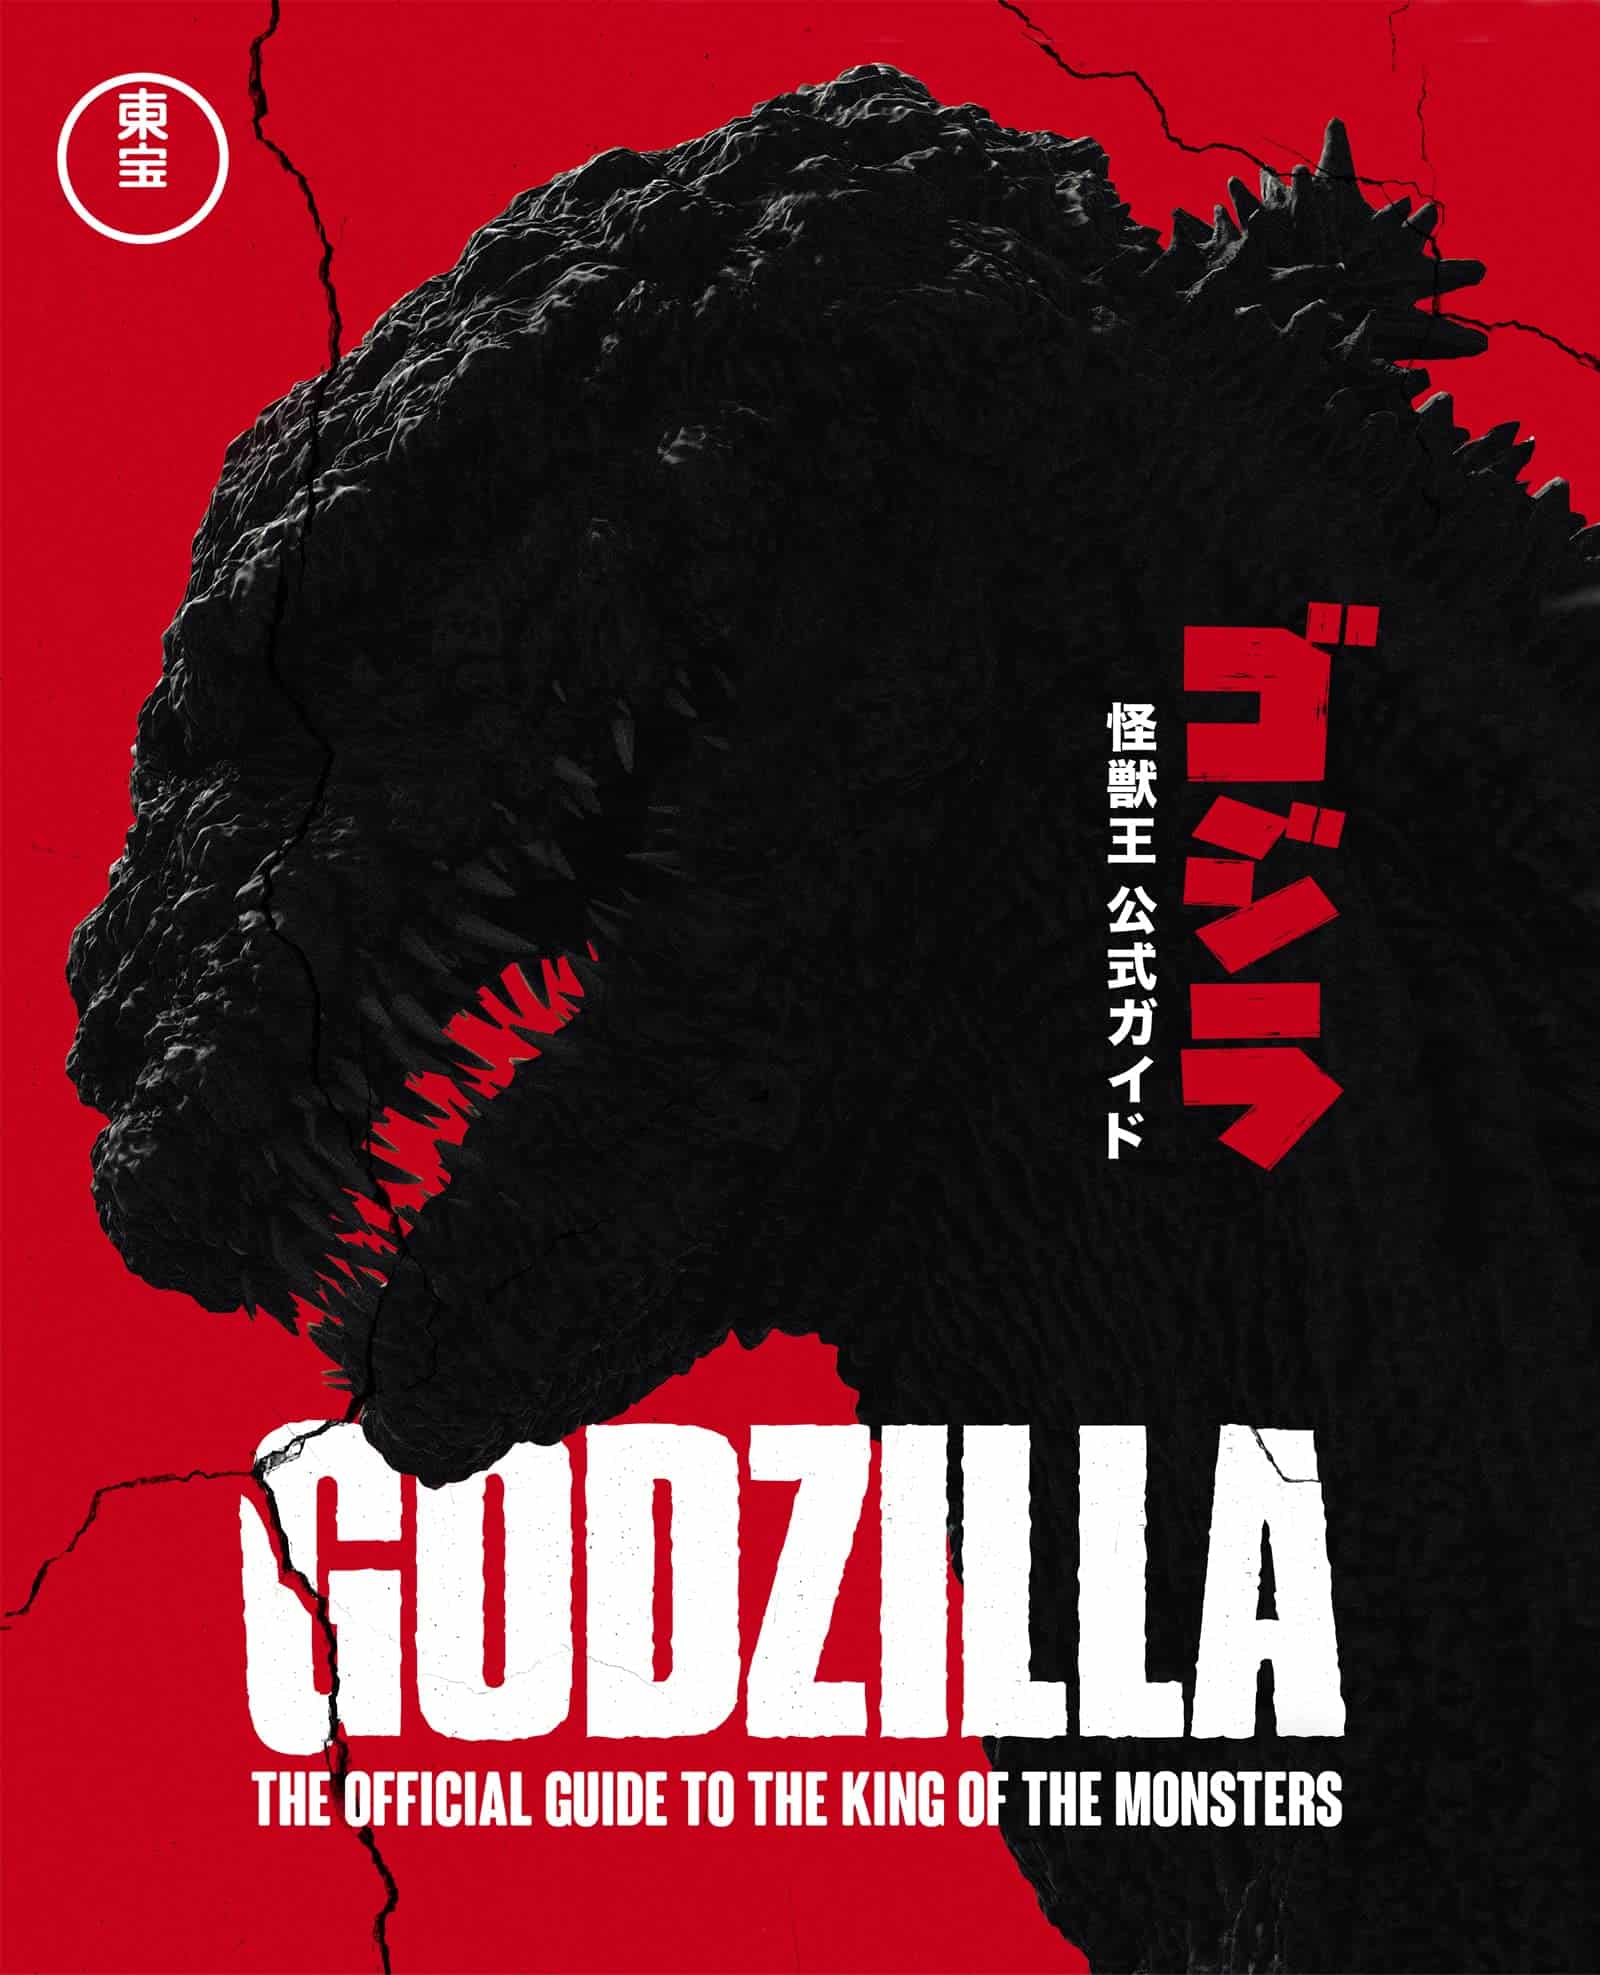 Joseph’s Book Review: Godzilla: The Ultimate Illustrated Guide